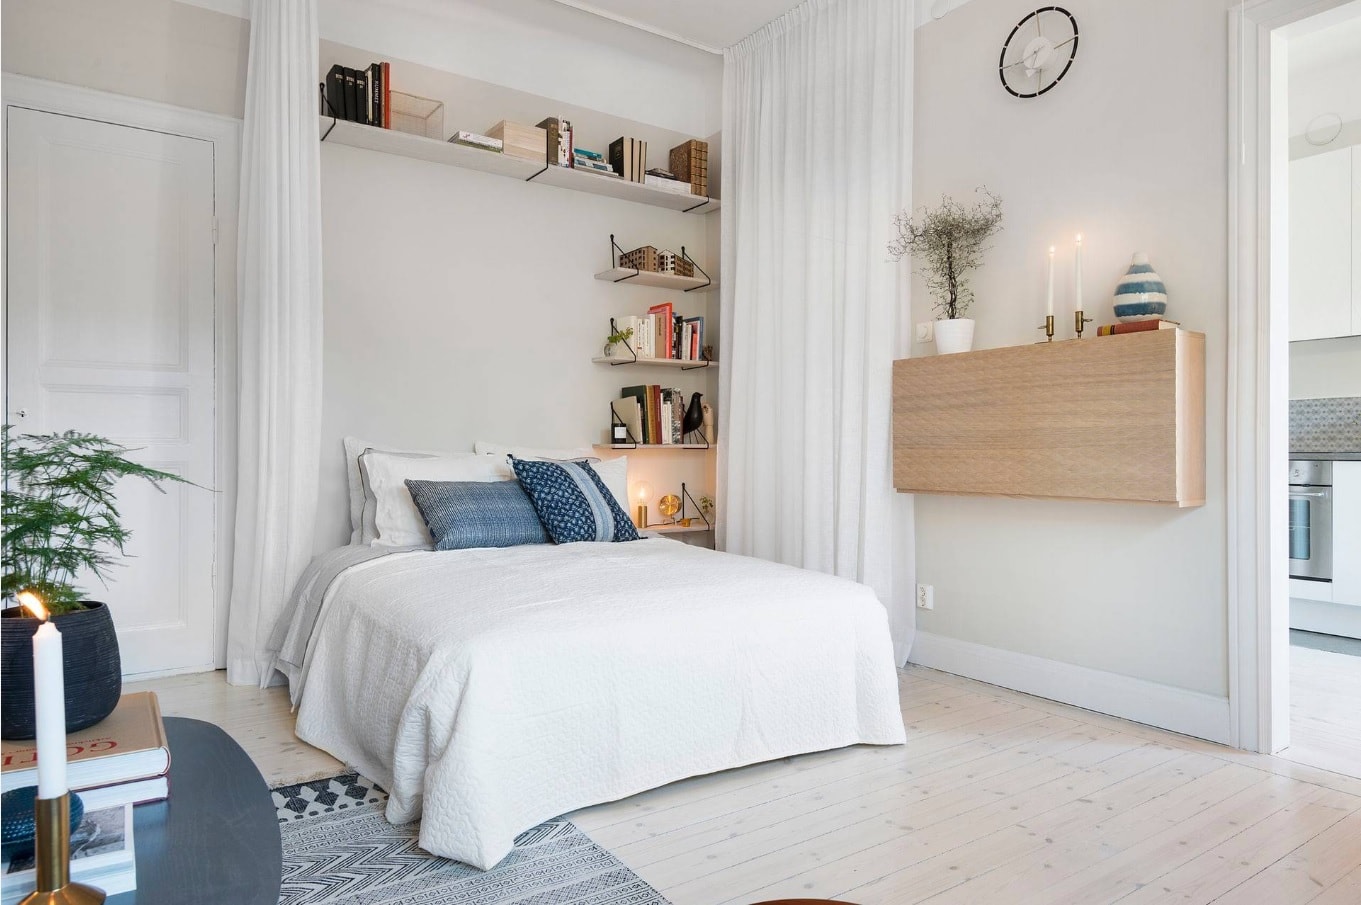 Nordic Interior Design Examples in Real Homes Photos